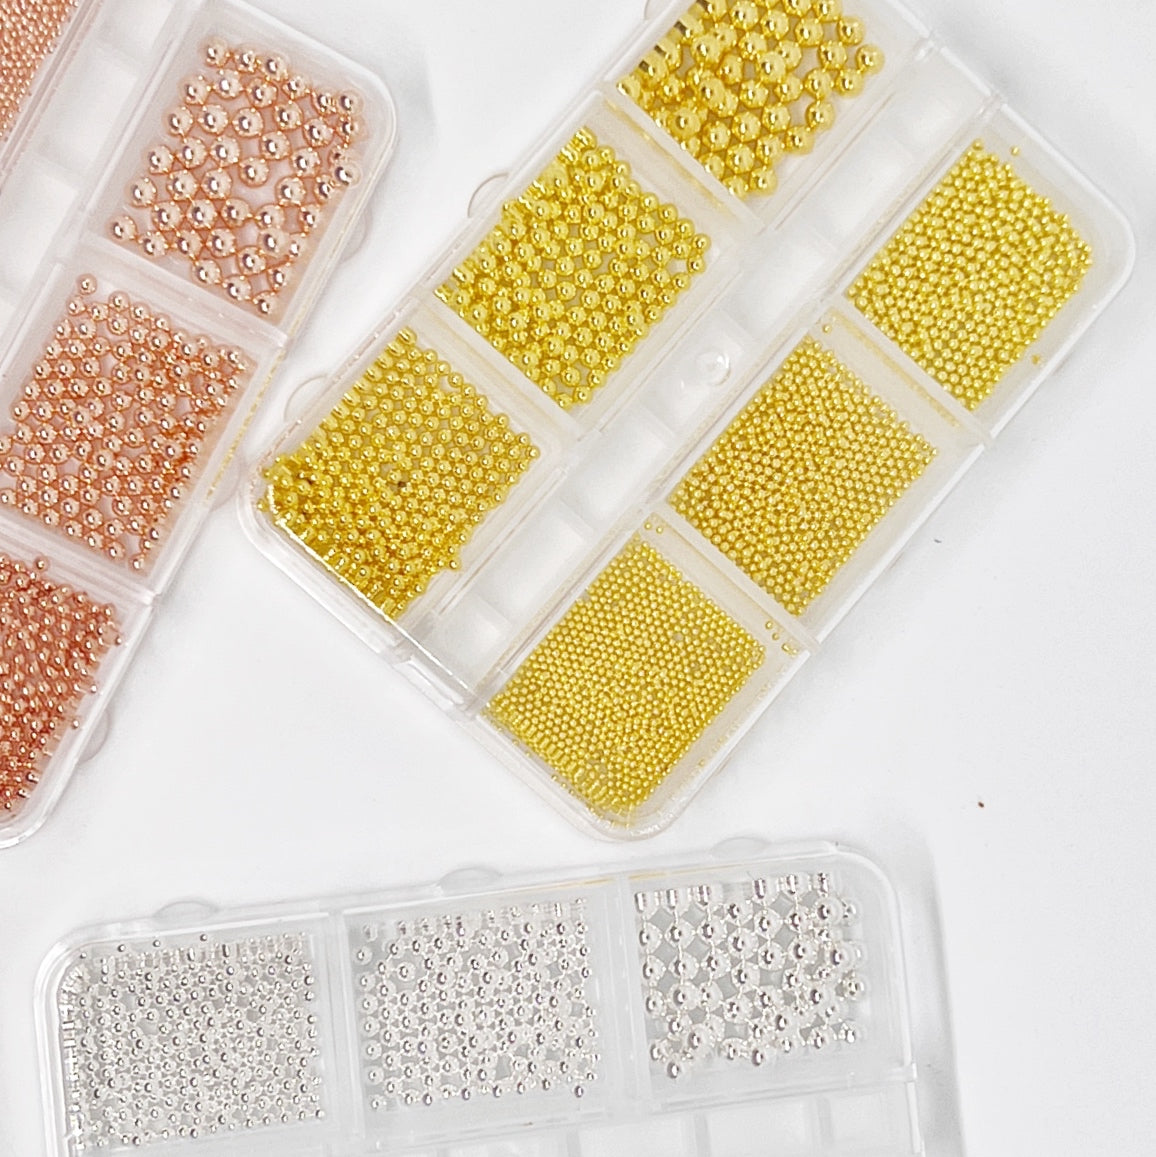 Metal Balls (Caviar) - Assortment of Small to Large Sizes in Gold, Rose Gold, and Silver, Displayed from Above in a Clear Case on a White Background.